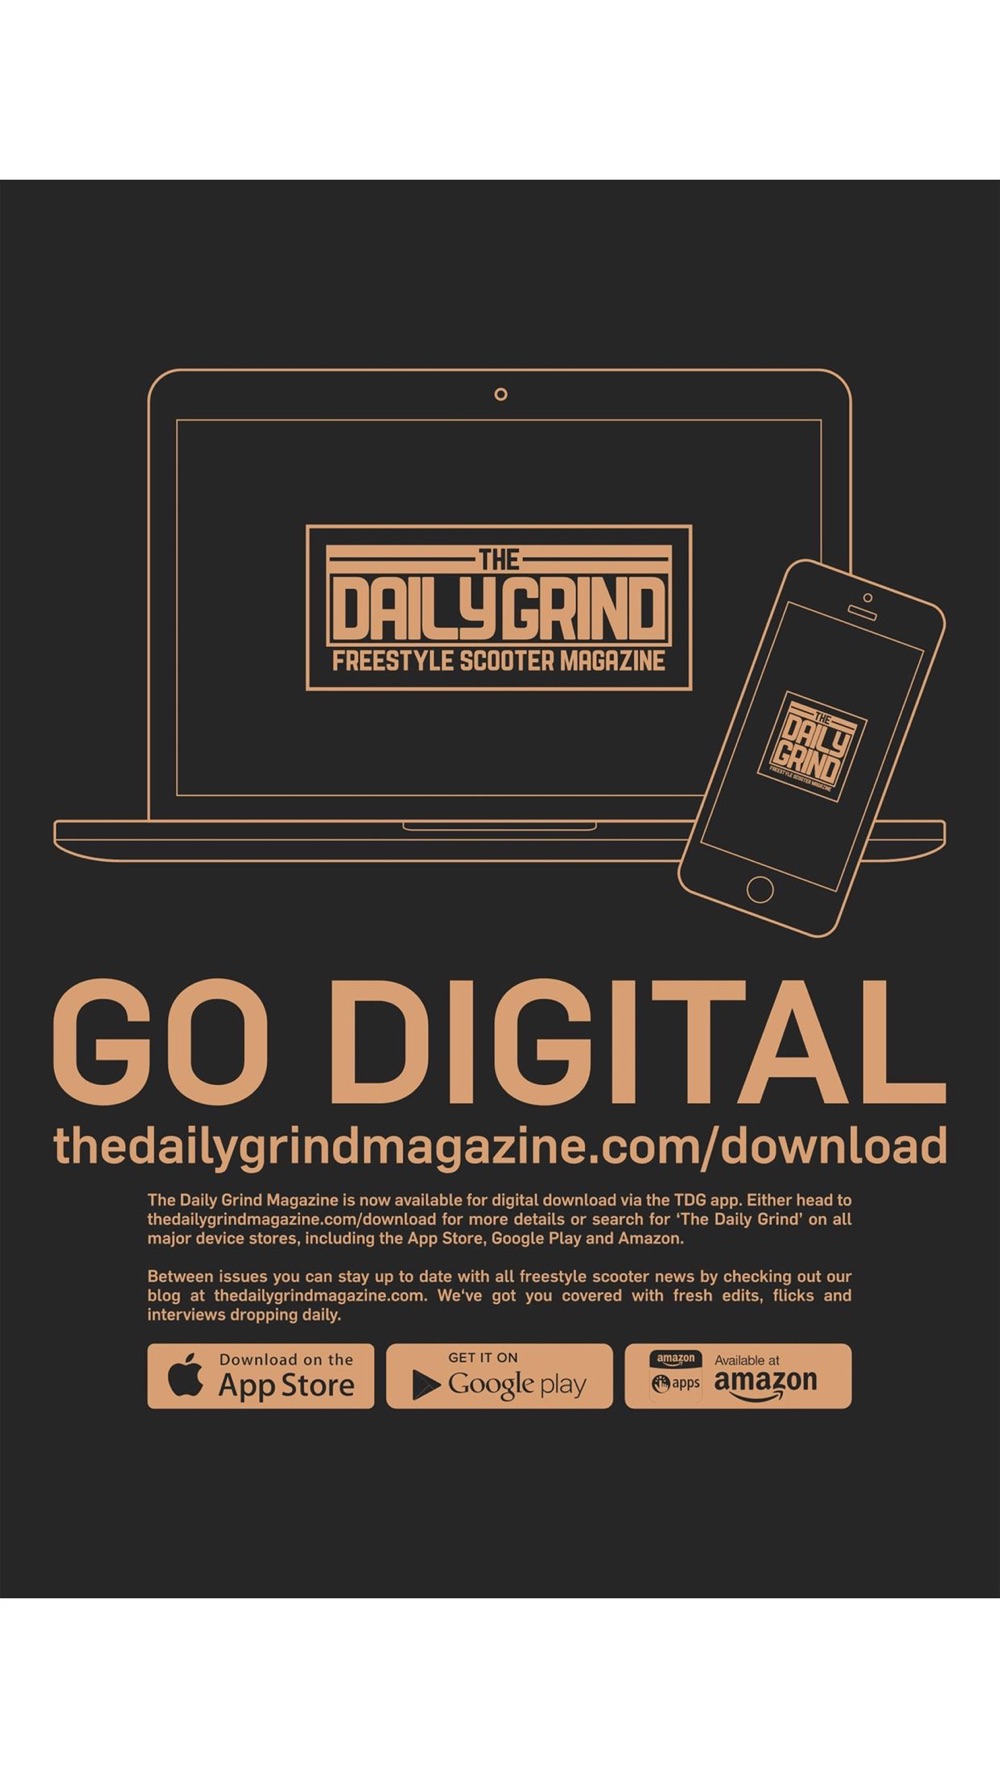 The Daily Grind - Scooter Lifestyle Magazine Free Download App for iPhone -  STEPrimo.com